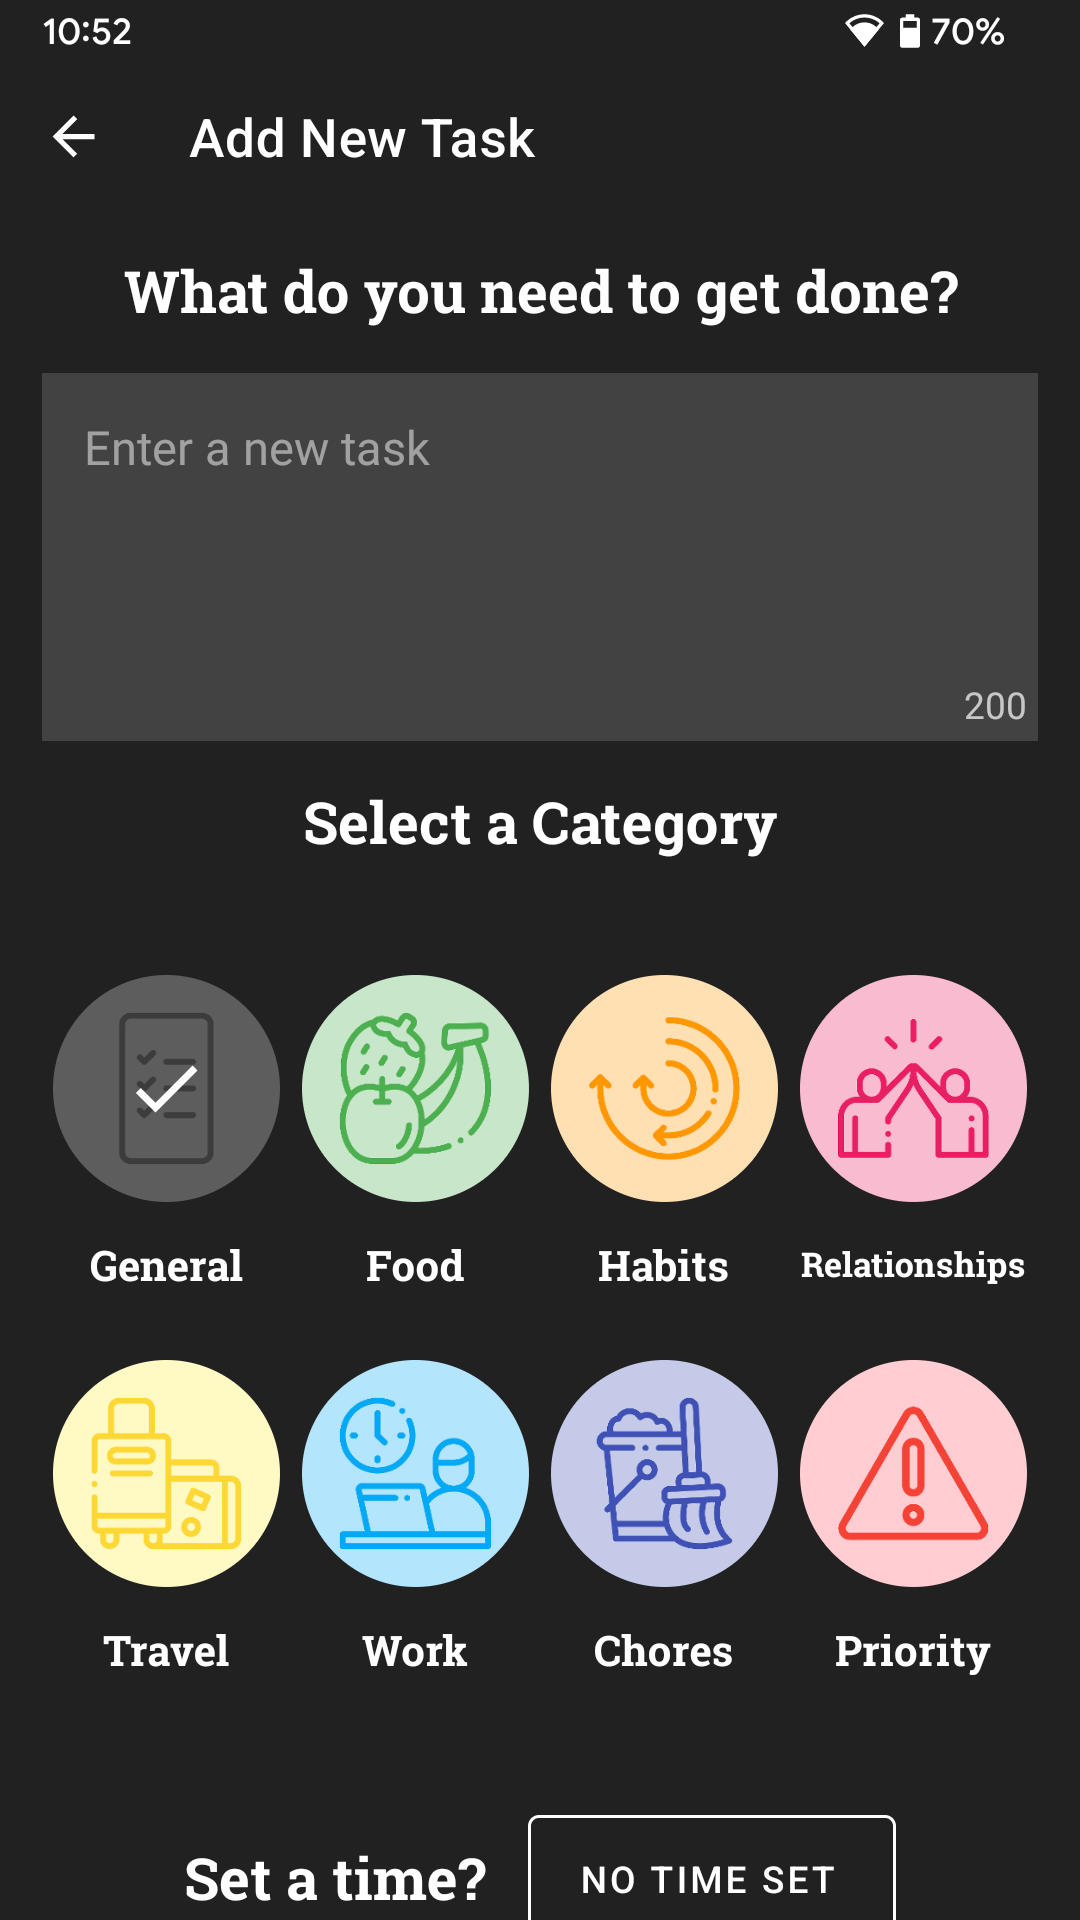 adding a new task and selecting a category